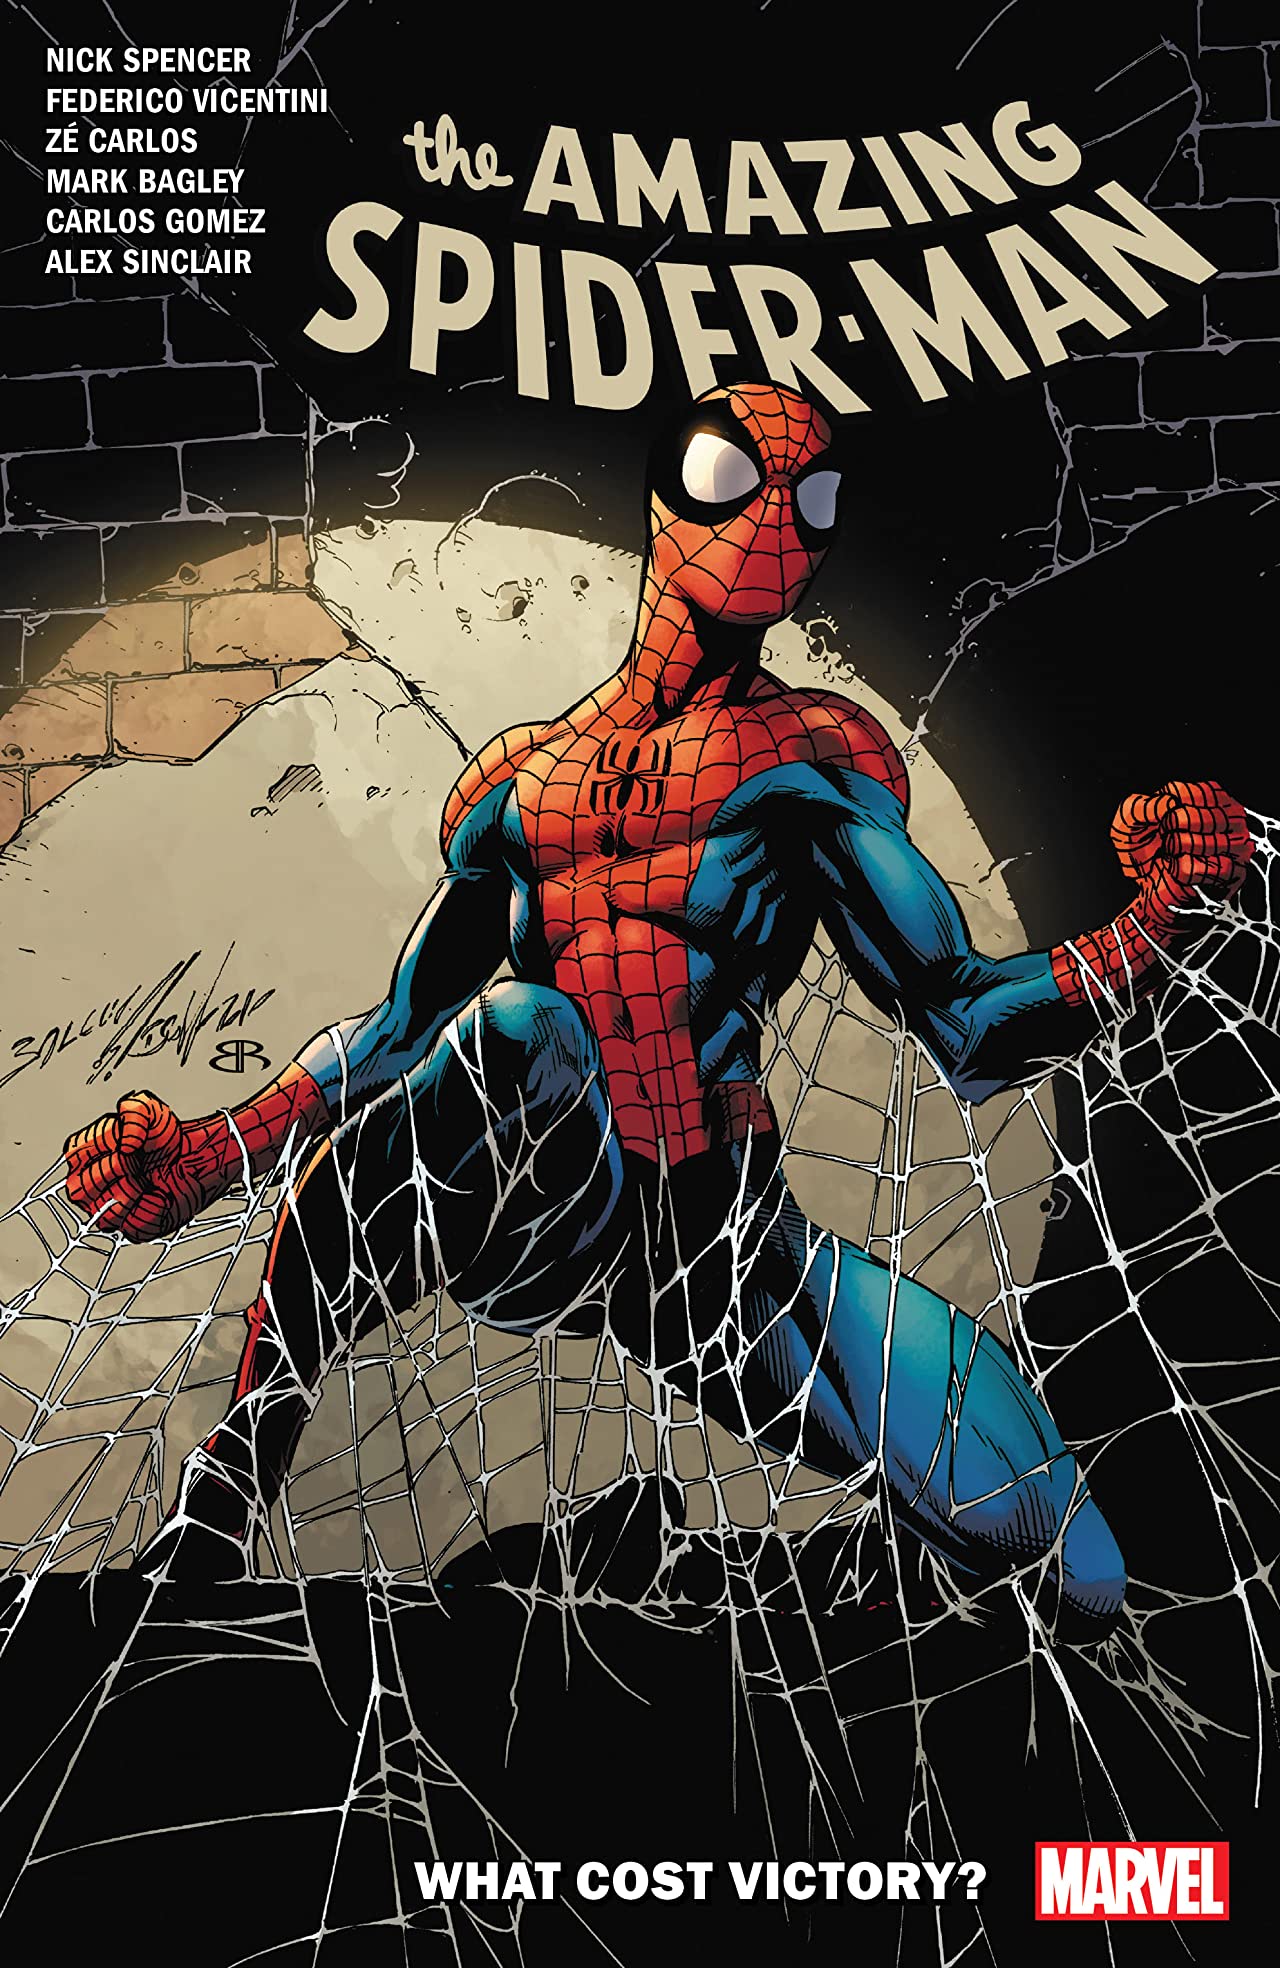 Amazing Spider-Man by Nick Spencer Vol. 15: What Cost Victory? (Trade Paperback)